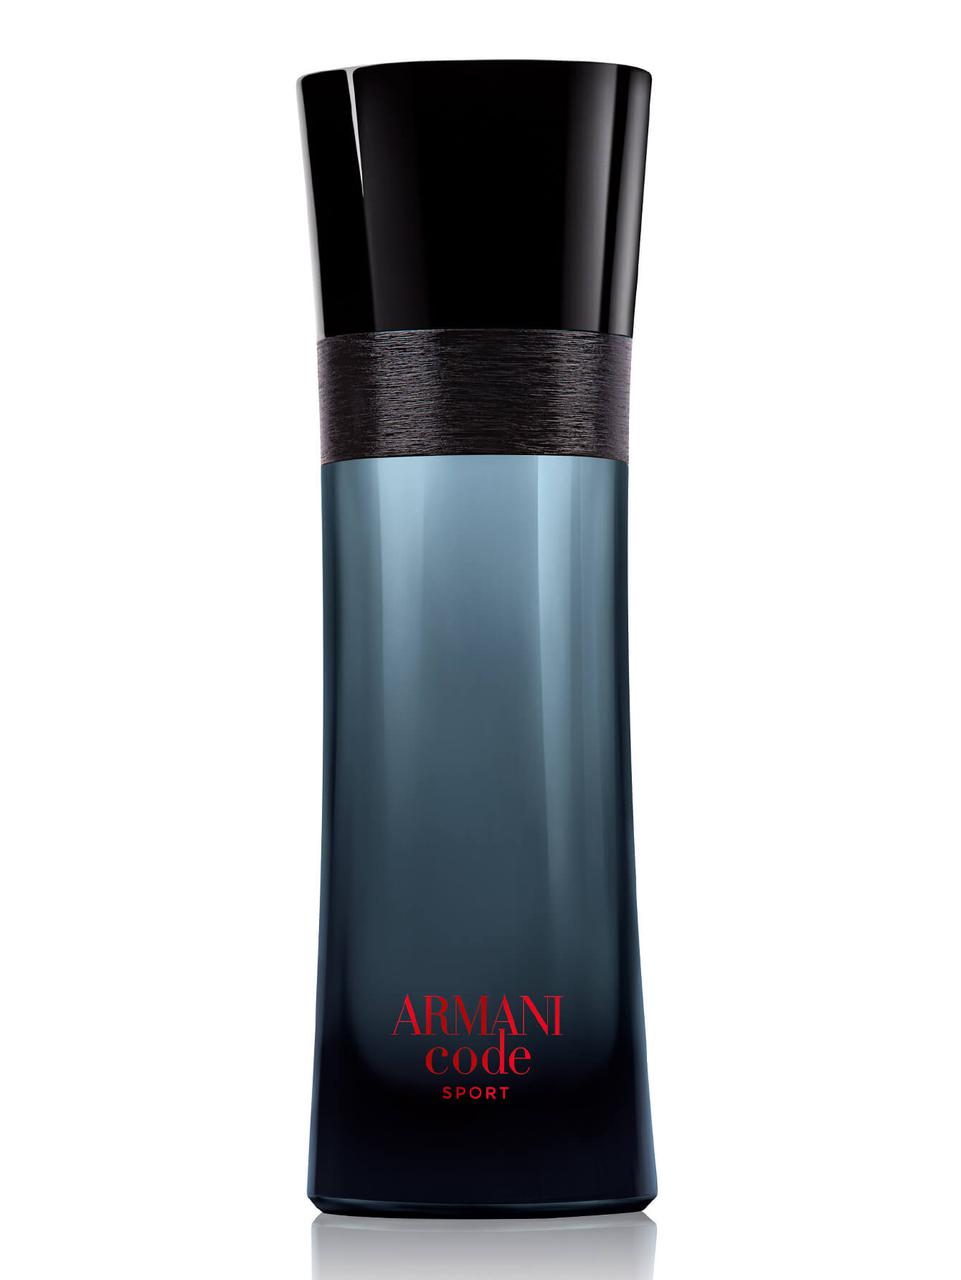 G.A. Armani Code SPORT pour homme edt 75ml TESTER